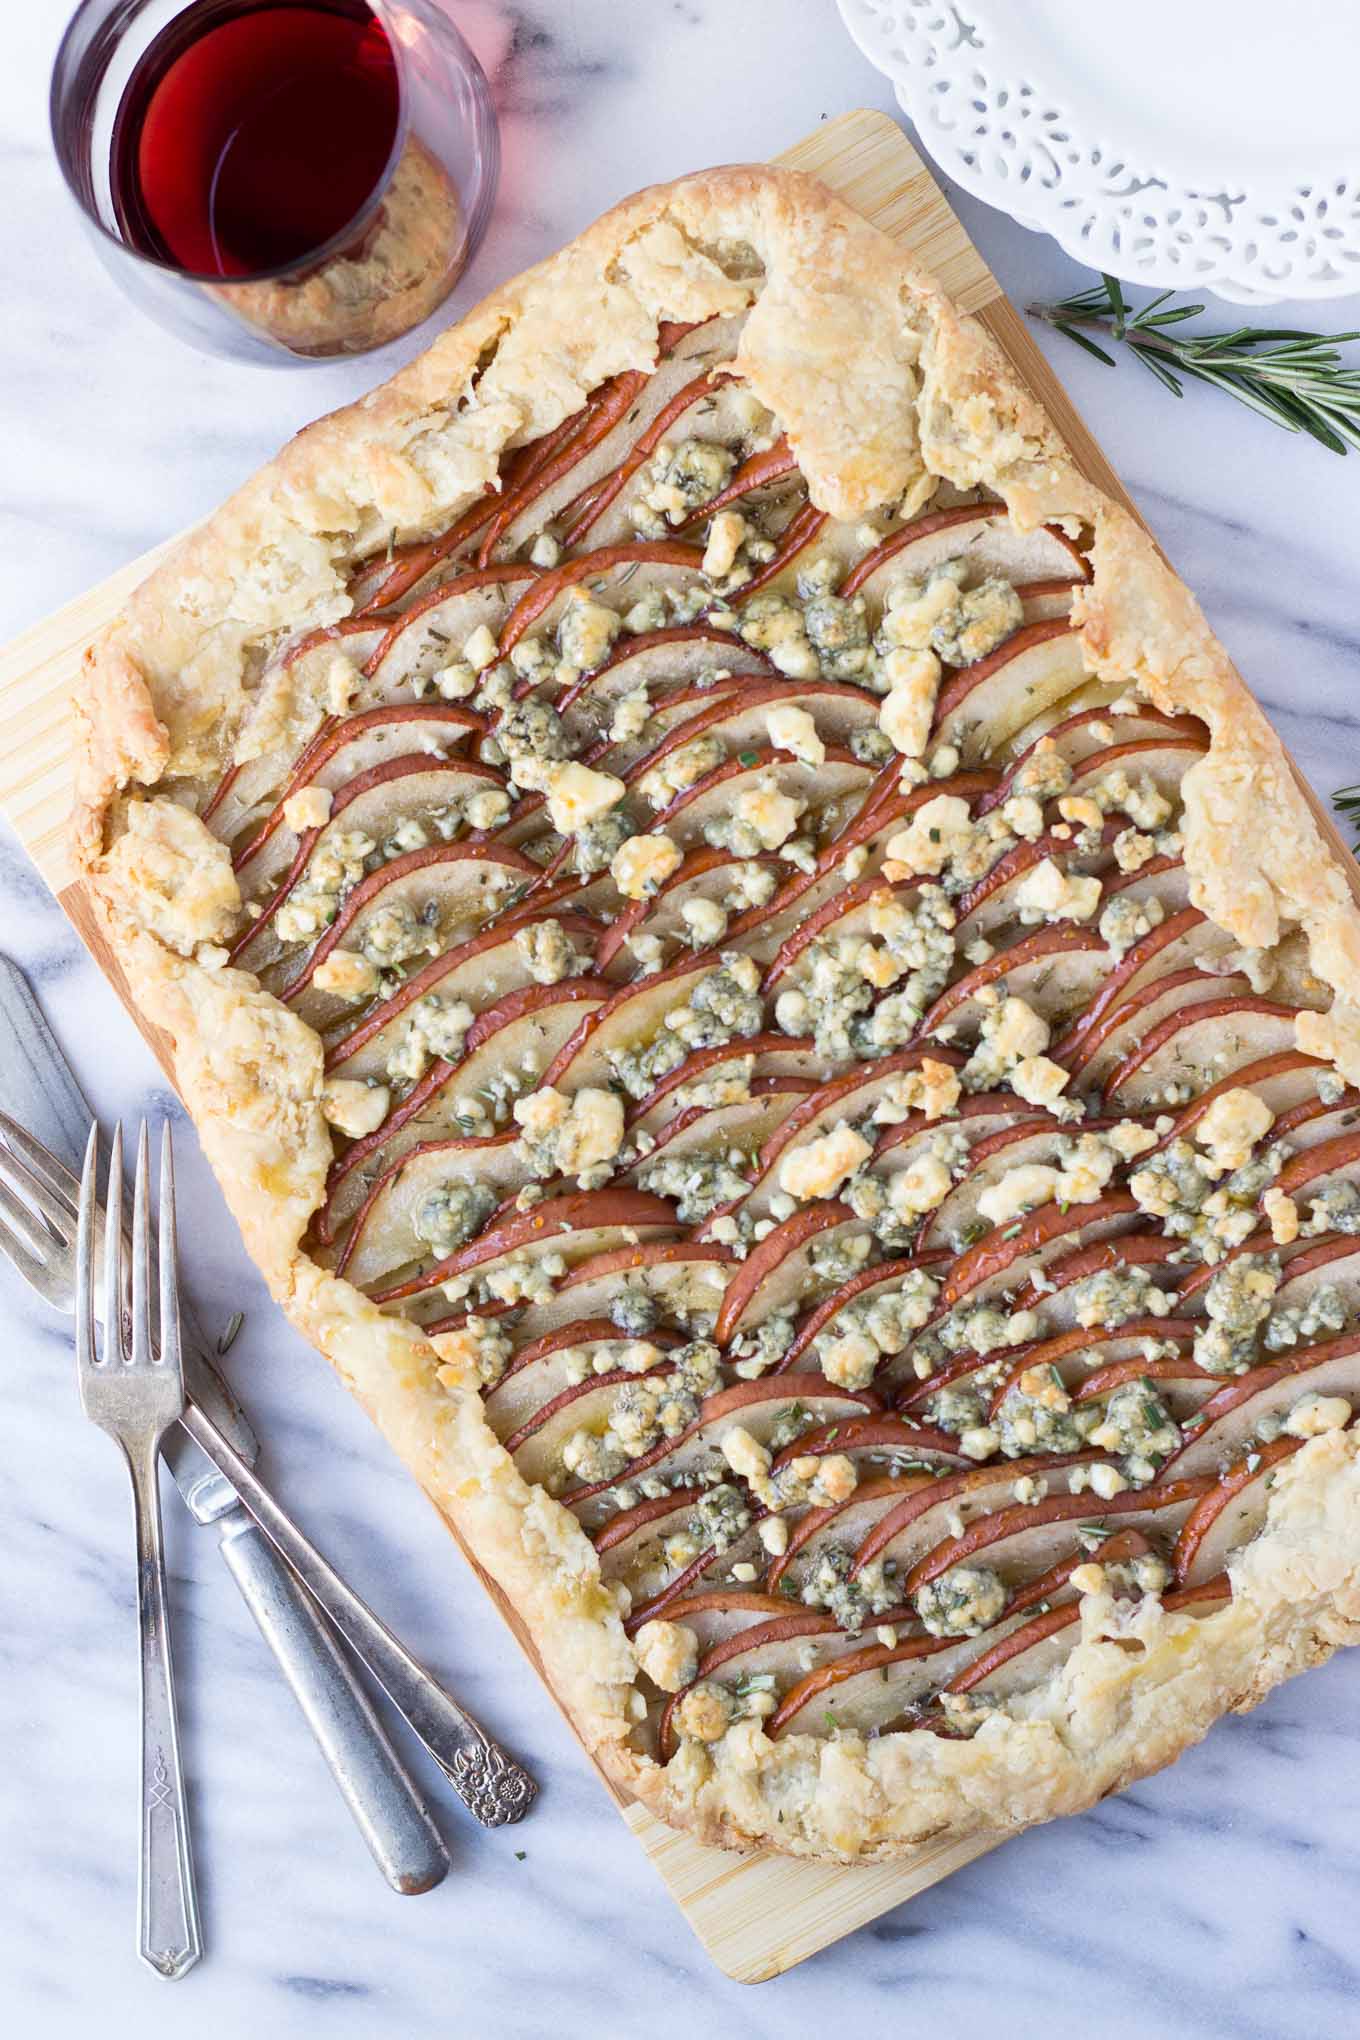 Savory Pear Tart - a flakey crust topped with Bosc pears, rosemary, gorgonzola, and drizzled with honey for the delicate balance of sweet and savory! Excellent for a night-in with wine or as a holiday appetizer.